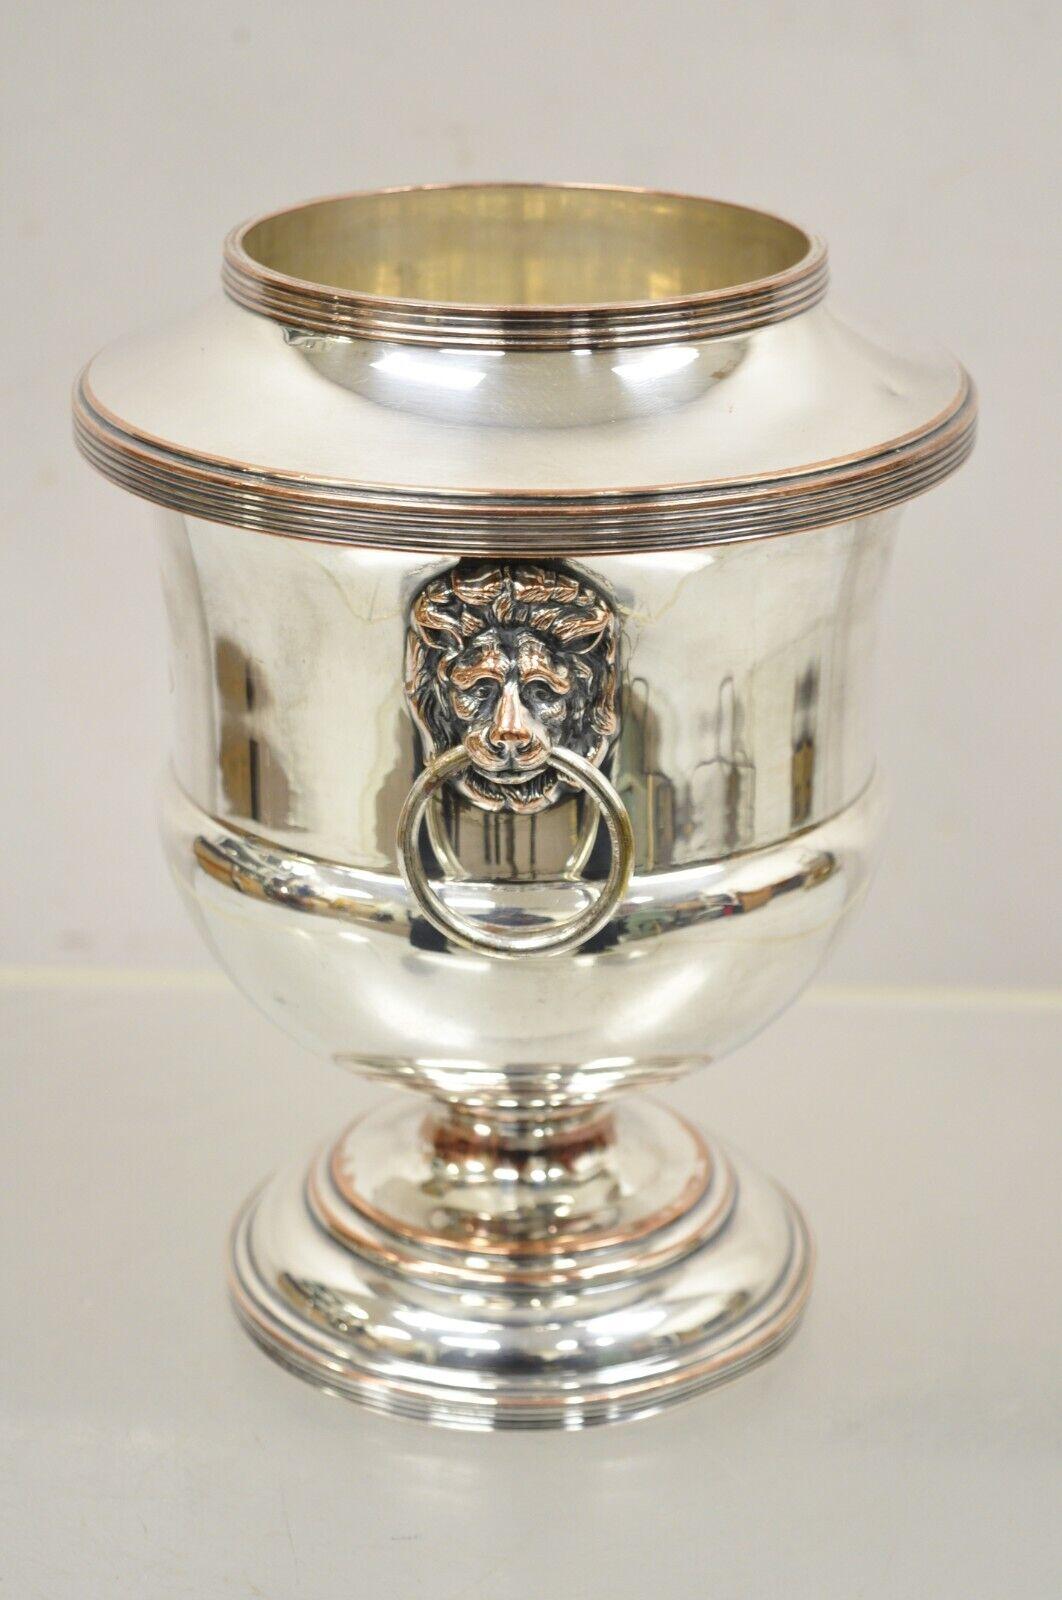 Antique English Regency Silver Plated Wine Chiller Ice Bucket With Lion Head Handles. Item features is engraved 